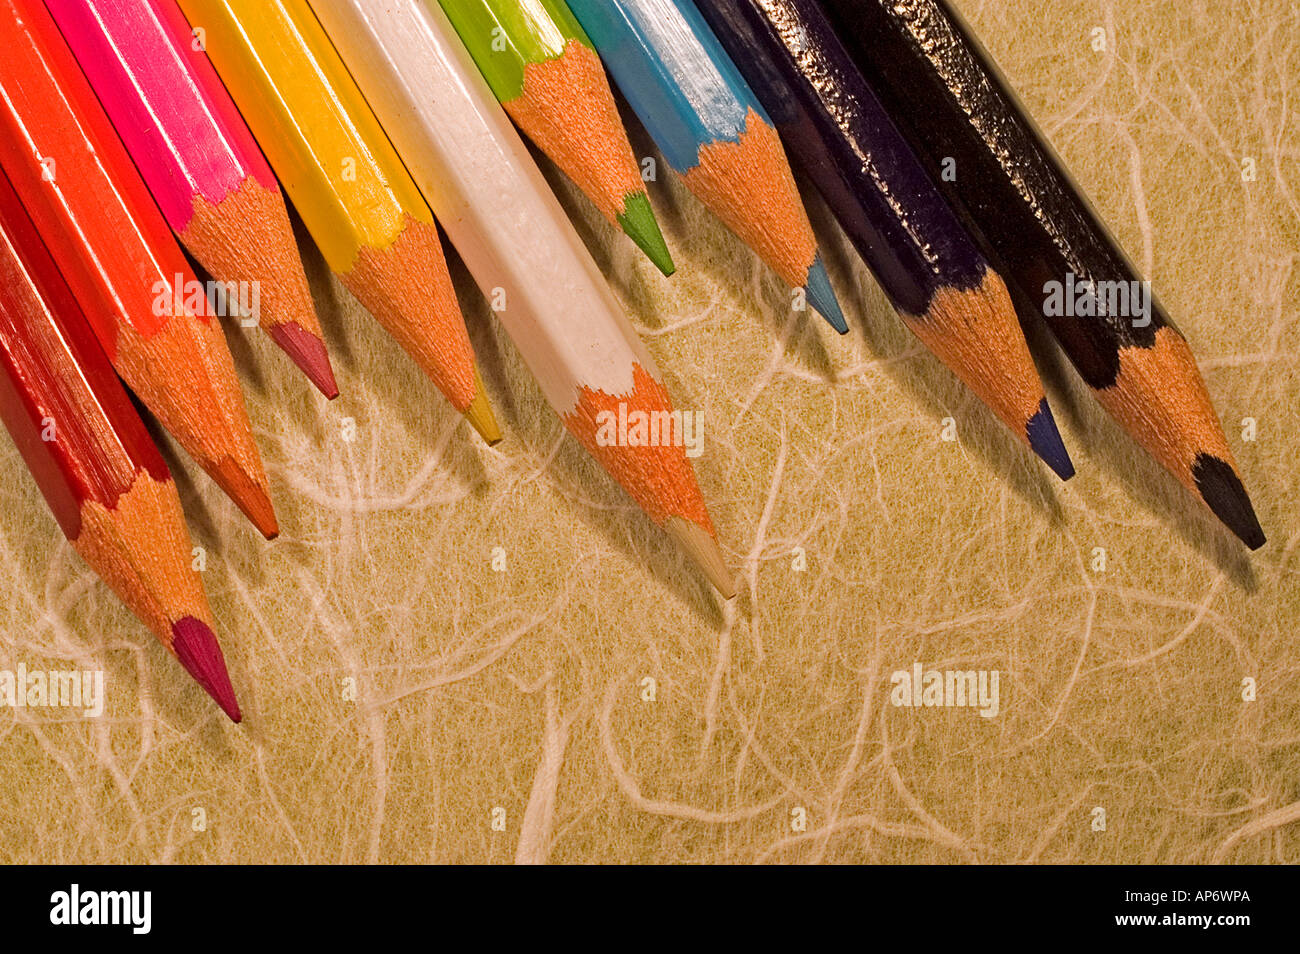 Sharpened coloured pencil crayons Stock Photo